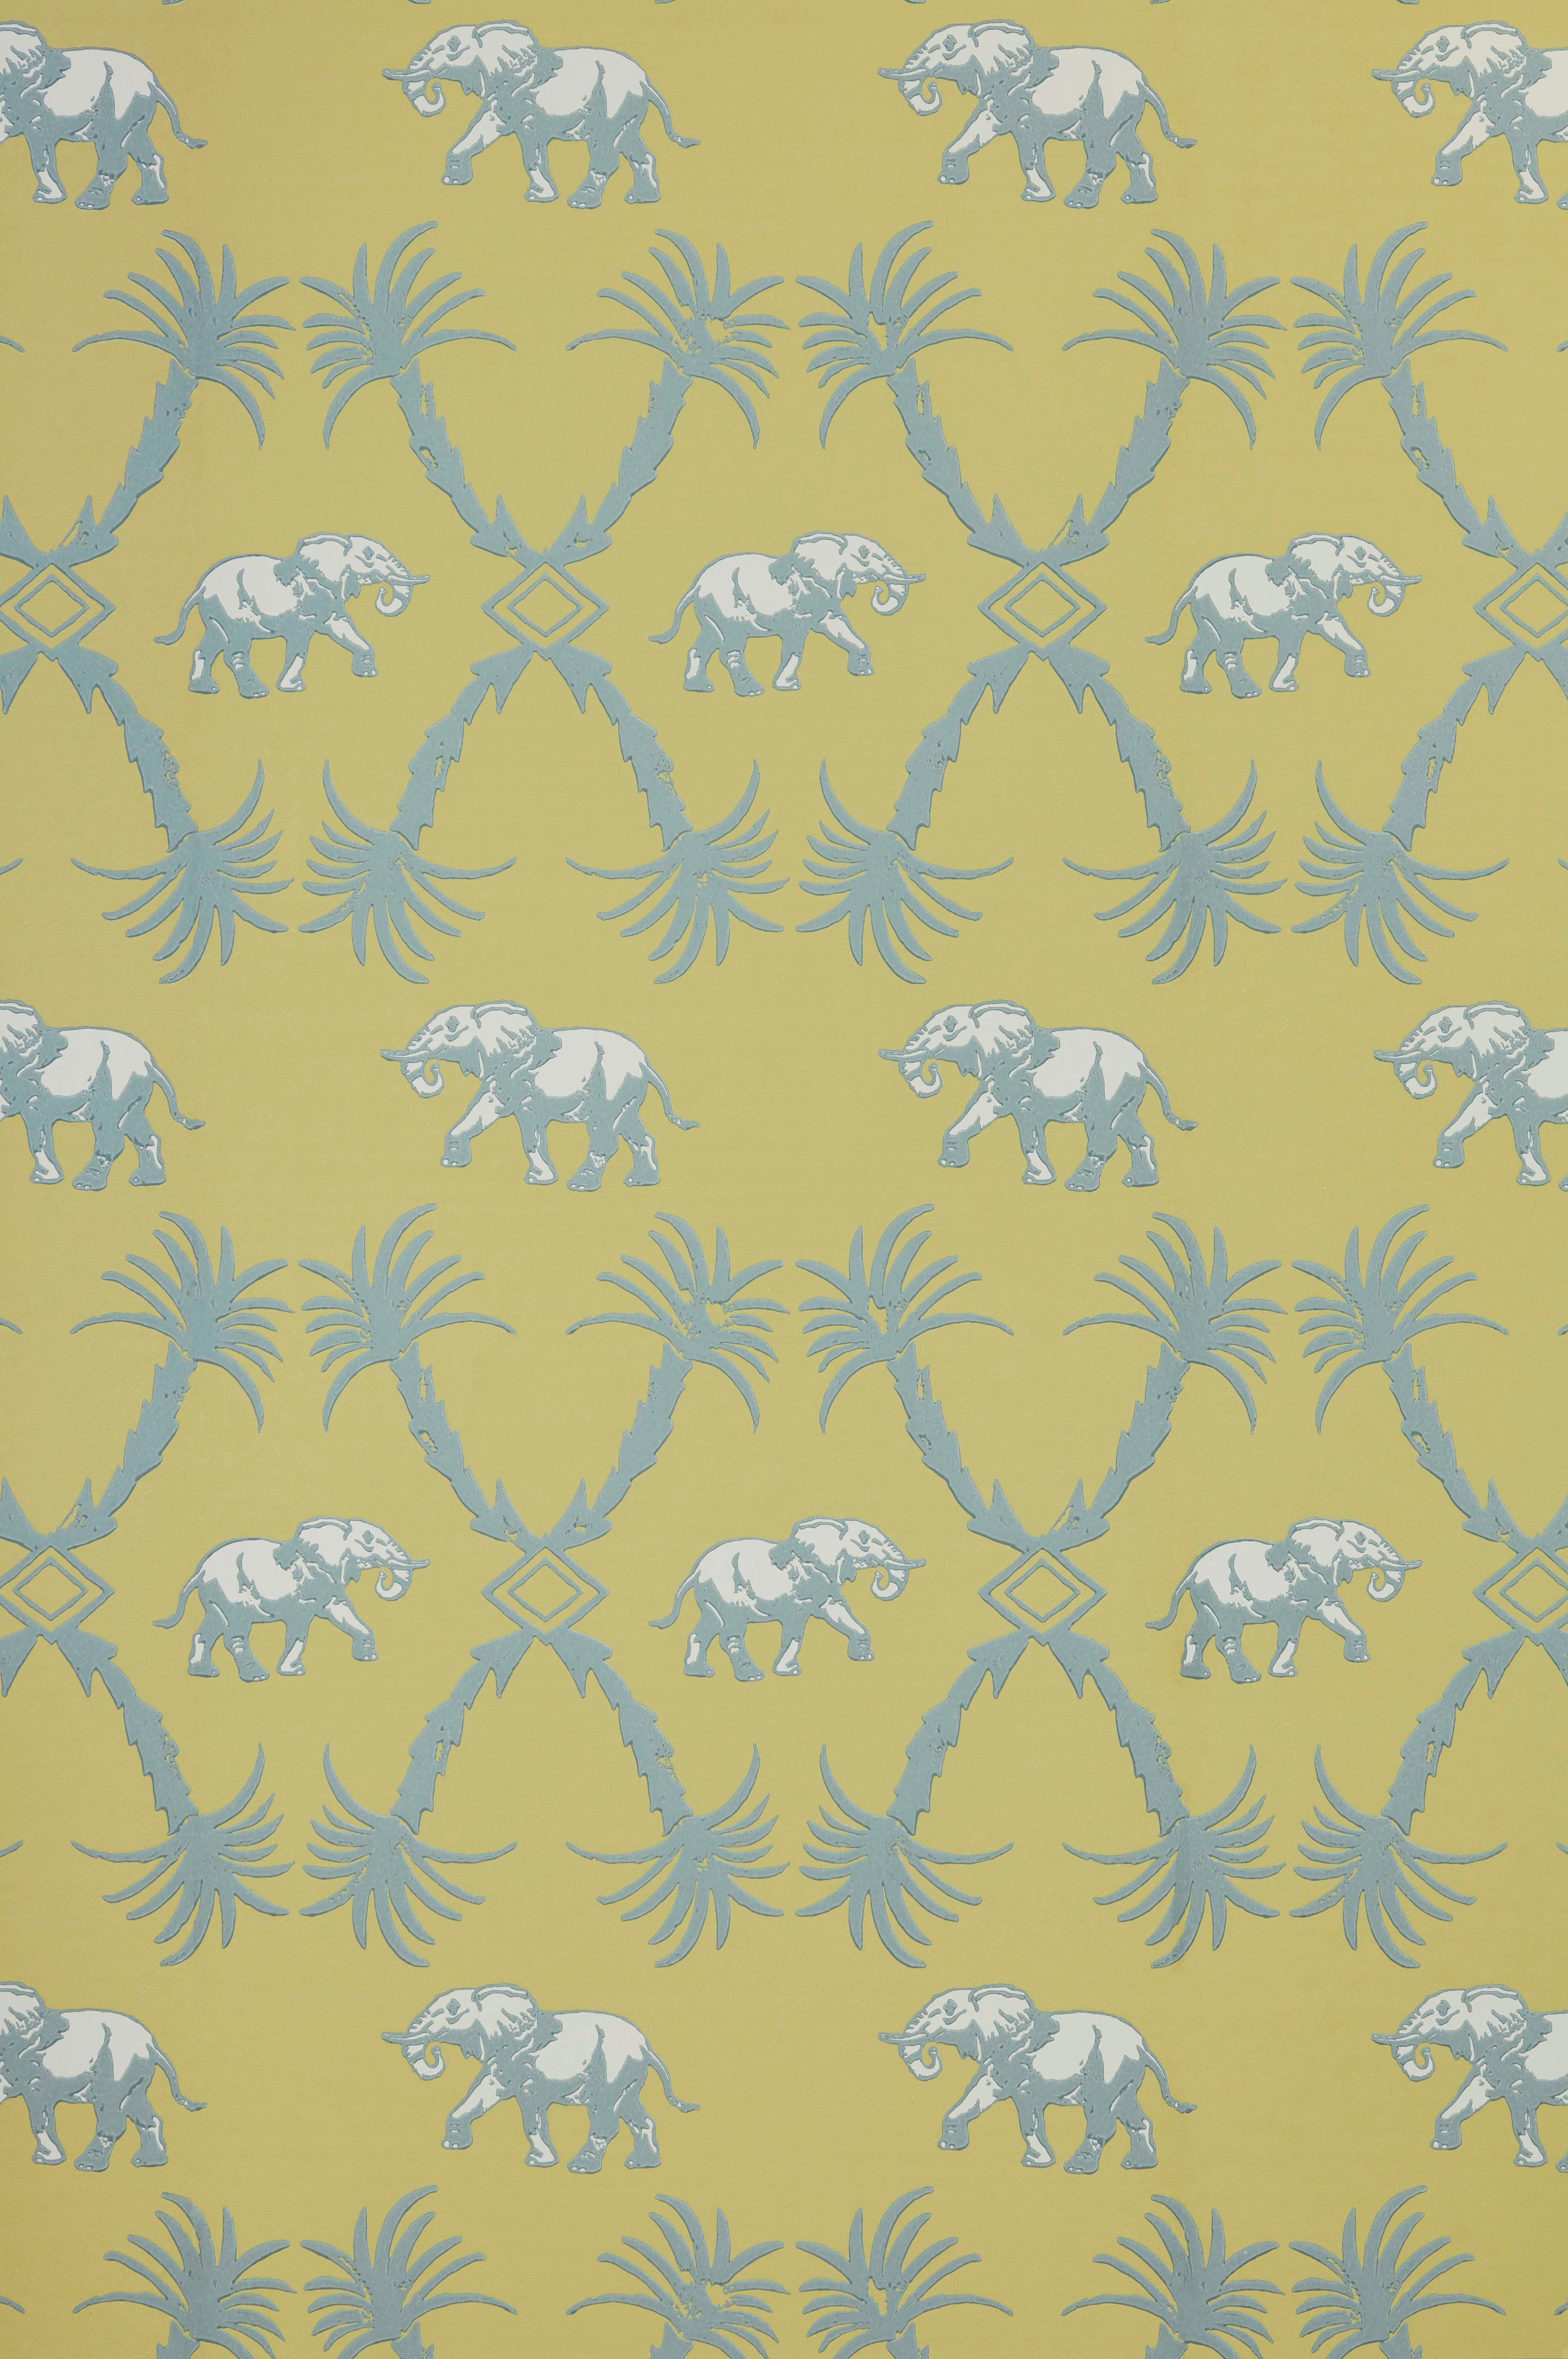 Color: Ochre/Blue 
Measures: Trim width 52cm/20.5 inches
Roll length 10m
Pattern repeat: Straight
Match length: 52cm/20.5 inches.

Please get in contact to order a sample.

A colonial inspired trellis of palm trees and marching elephants,